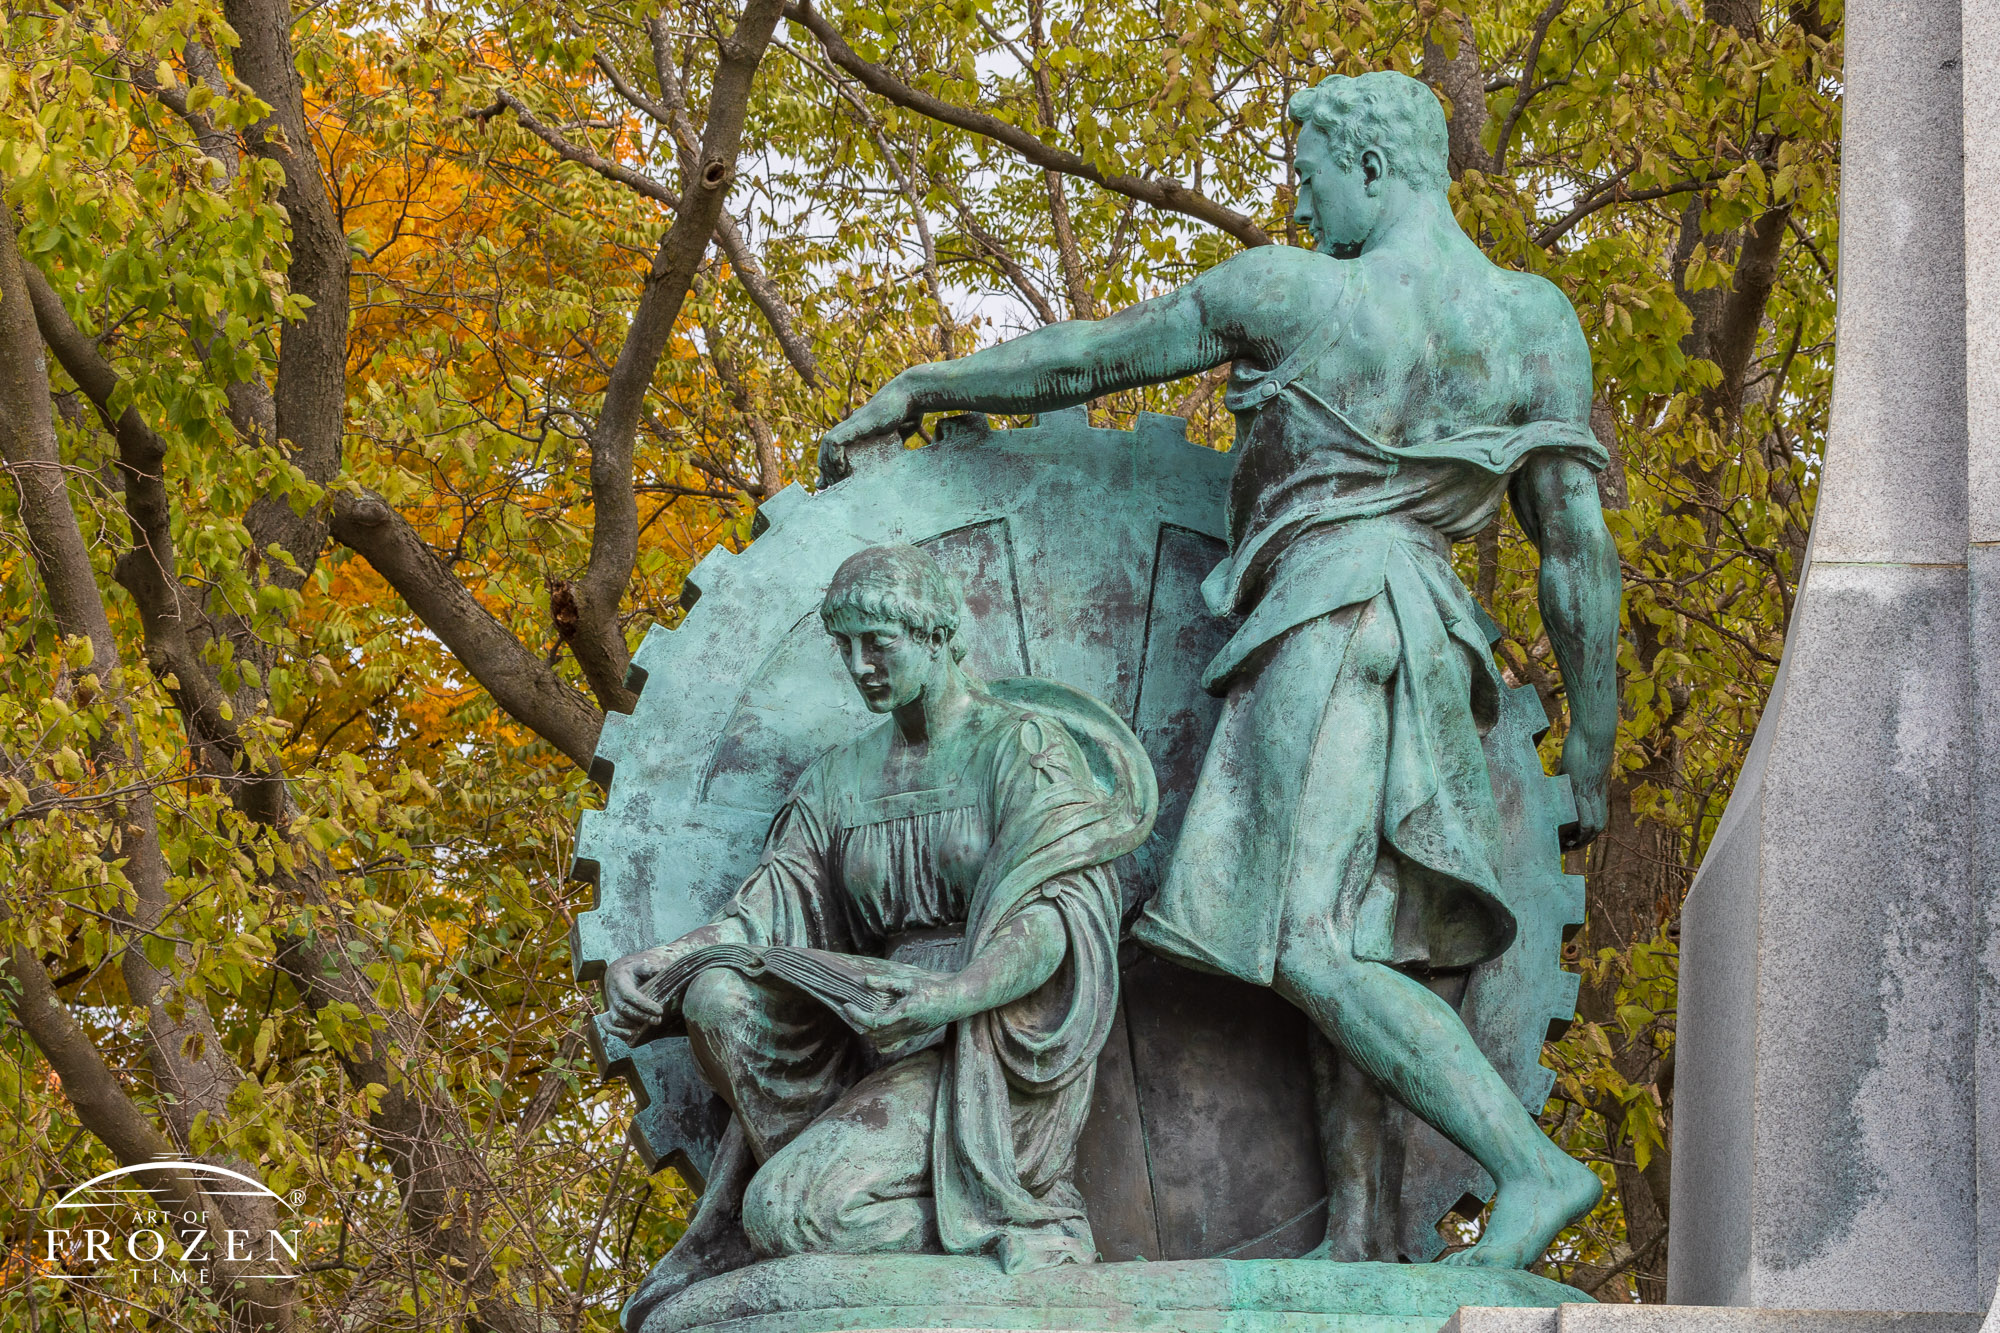 A bronze subgroup of John H. Patterson’s Memorial depicting a sculpture of a man maneuvering a large gear while a woman kneels next to him reading a book symbolizing his industrial and educational pursuits.